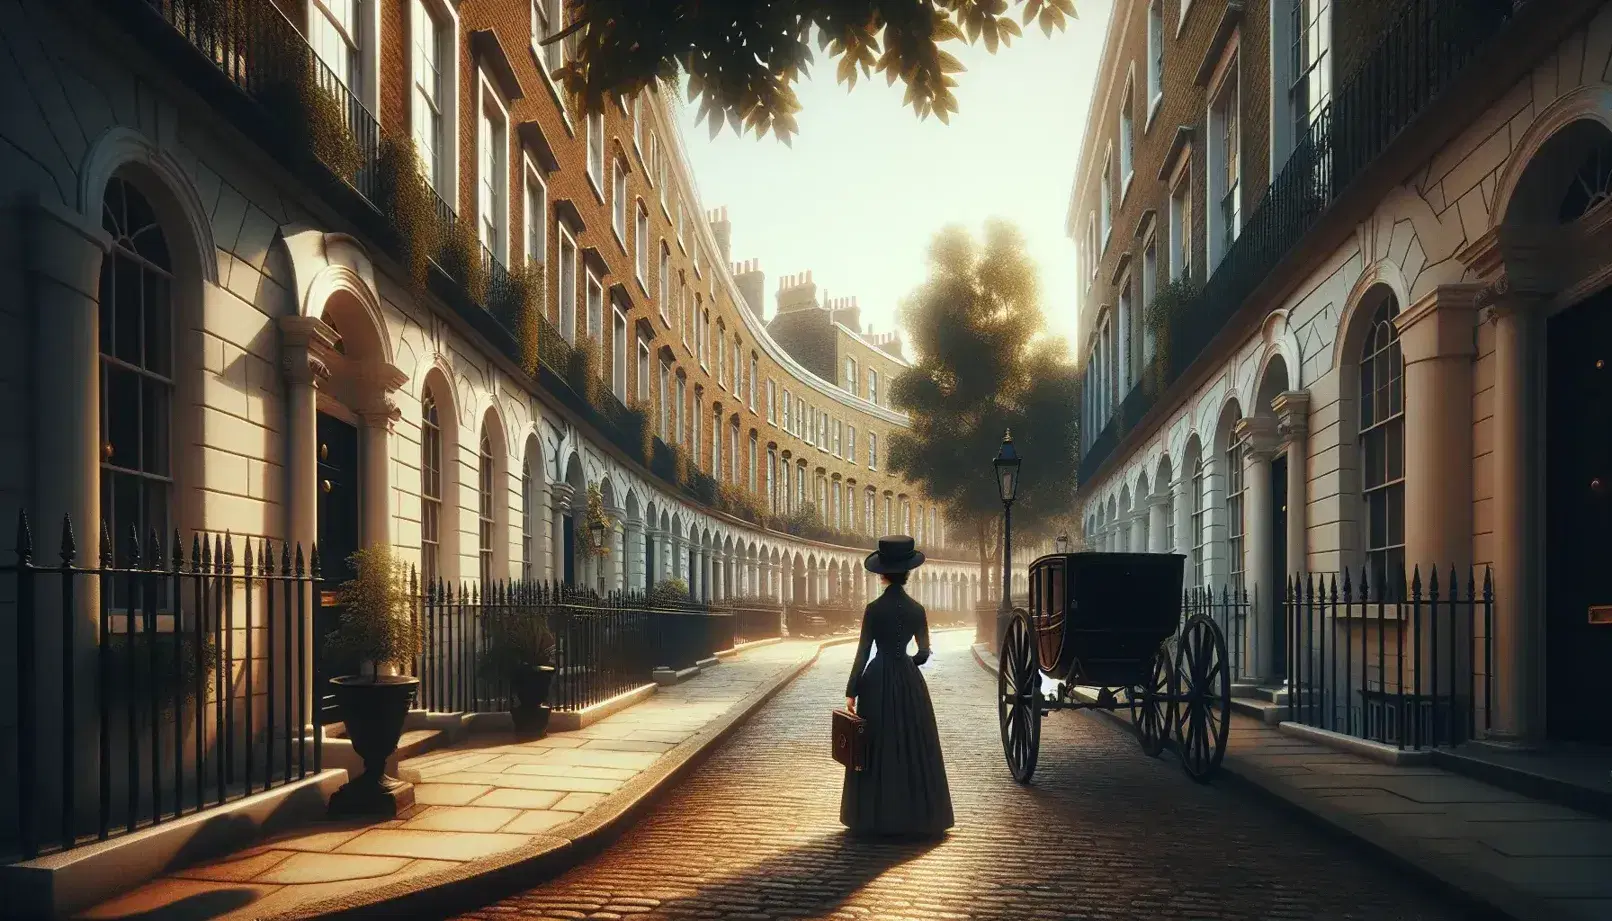 Early 20th-century cobblestone street in London with Georgian townhouses, a lone figure walking, parked vintage carriage, and a clear blue sky.